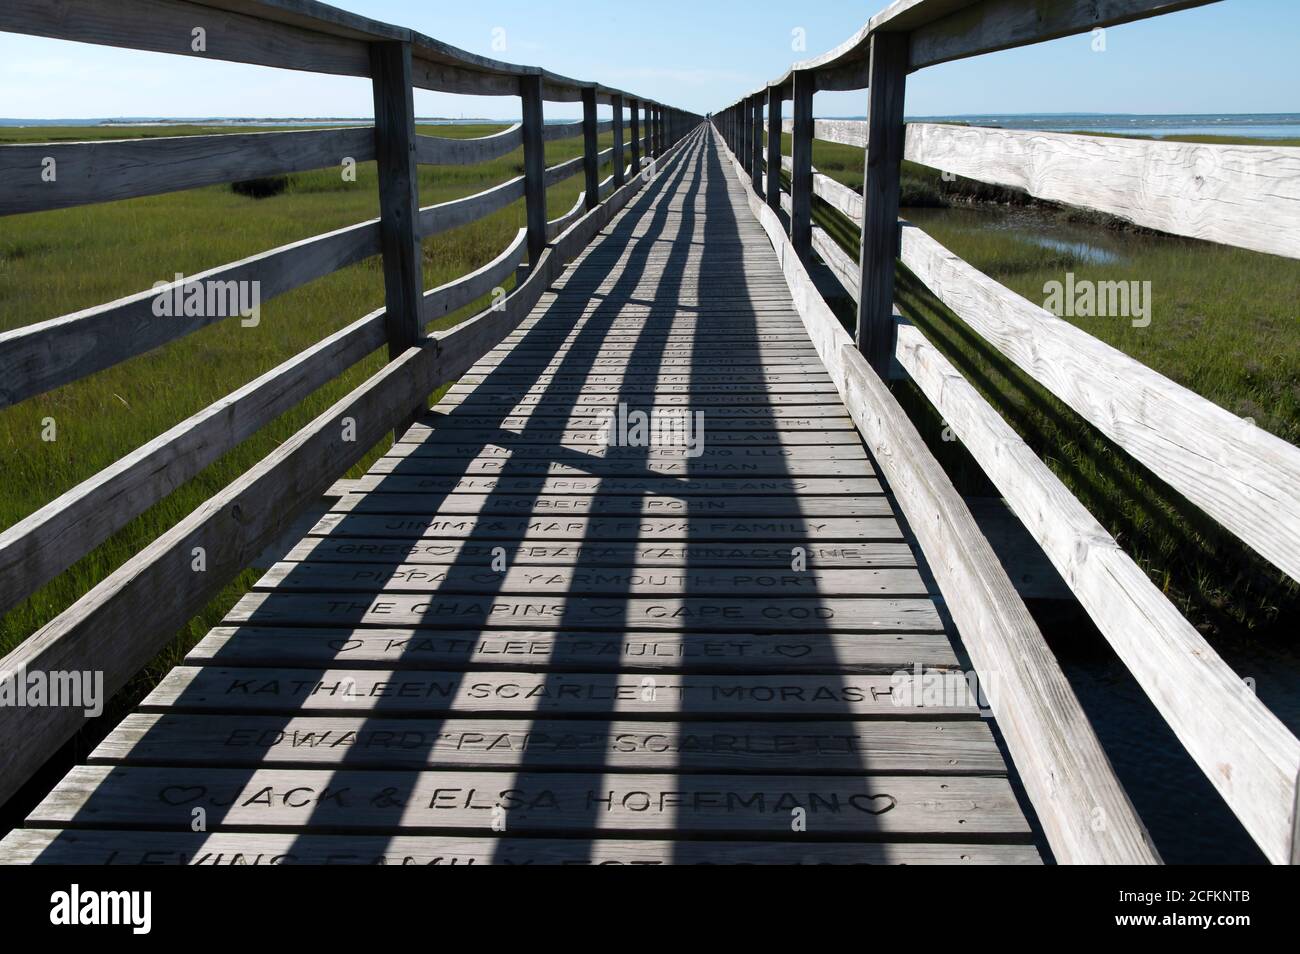 Shadows play a role in design at a Cape Cod boardwalk. Stock Photo